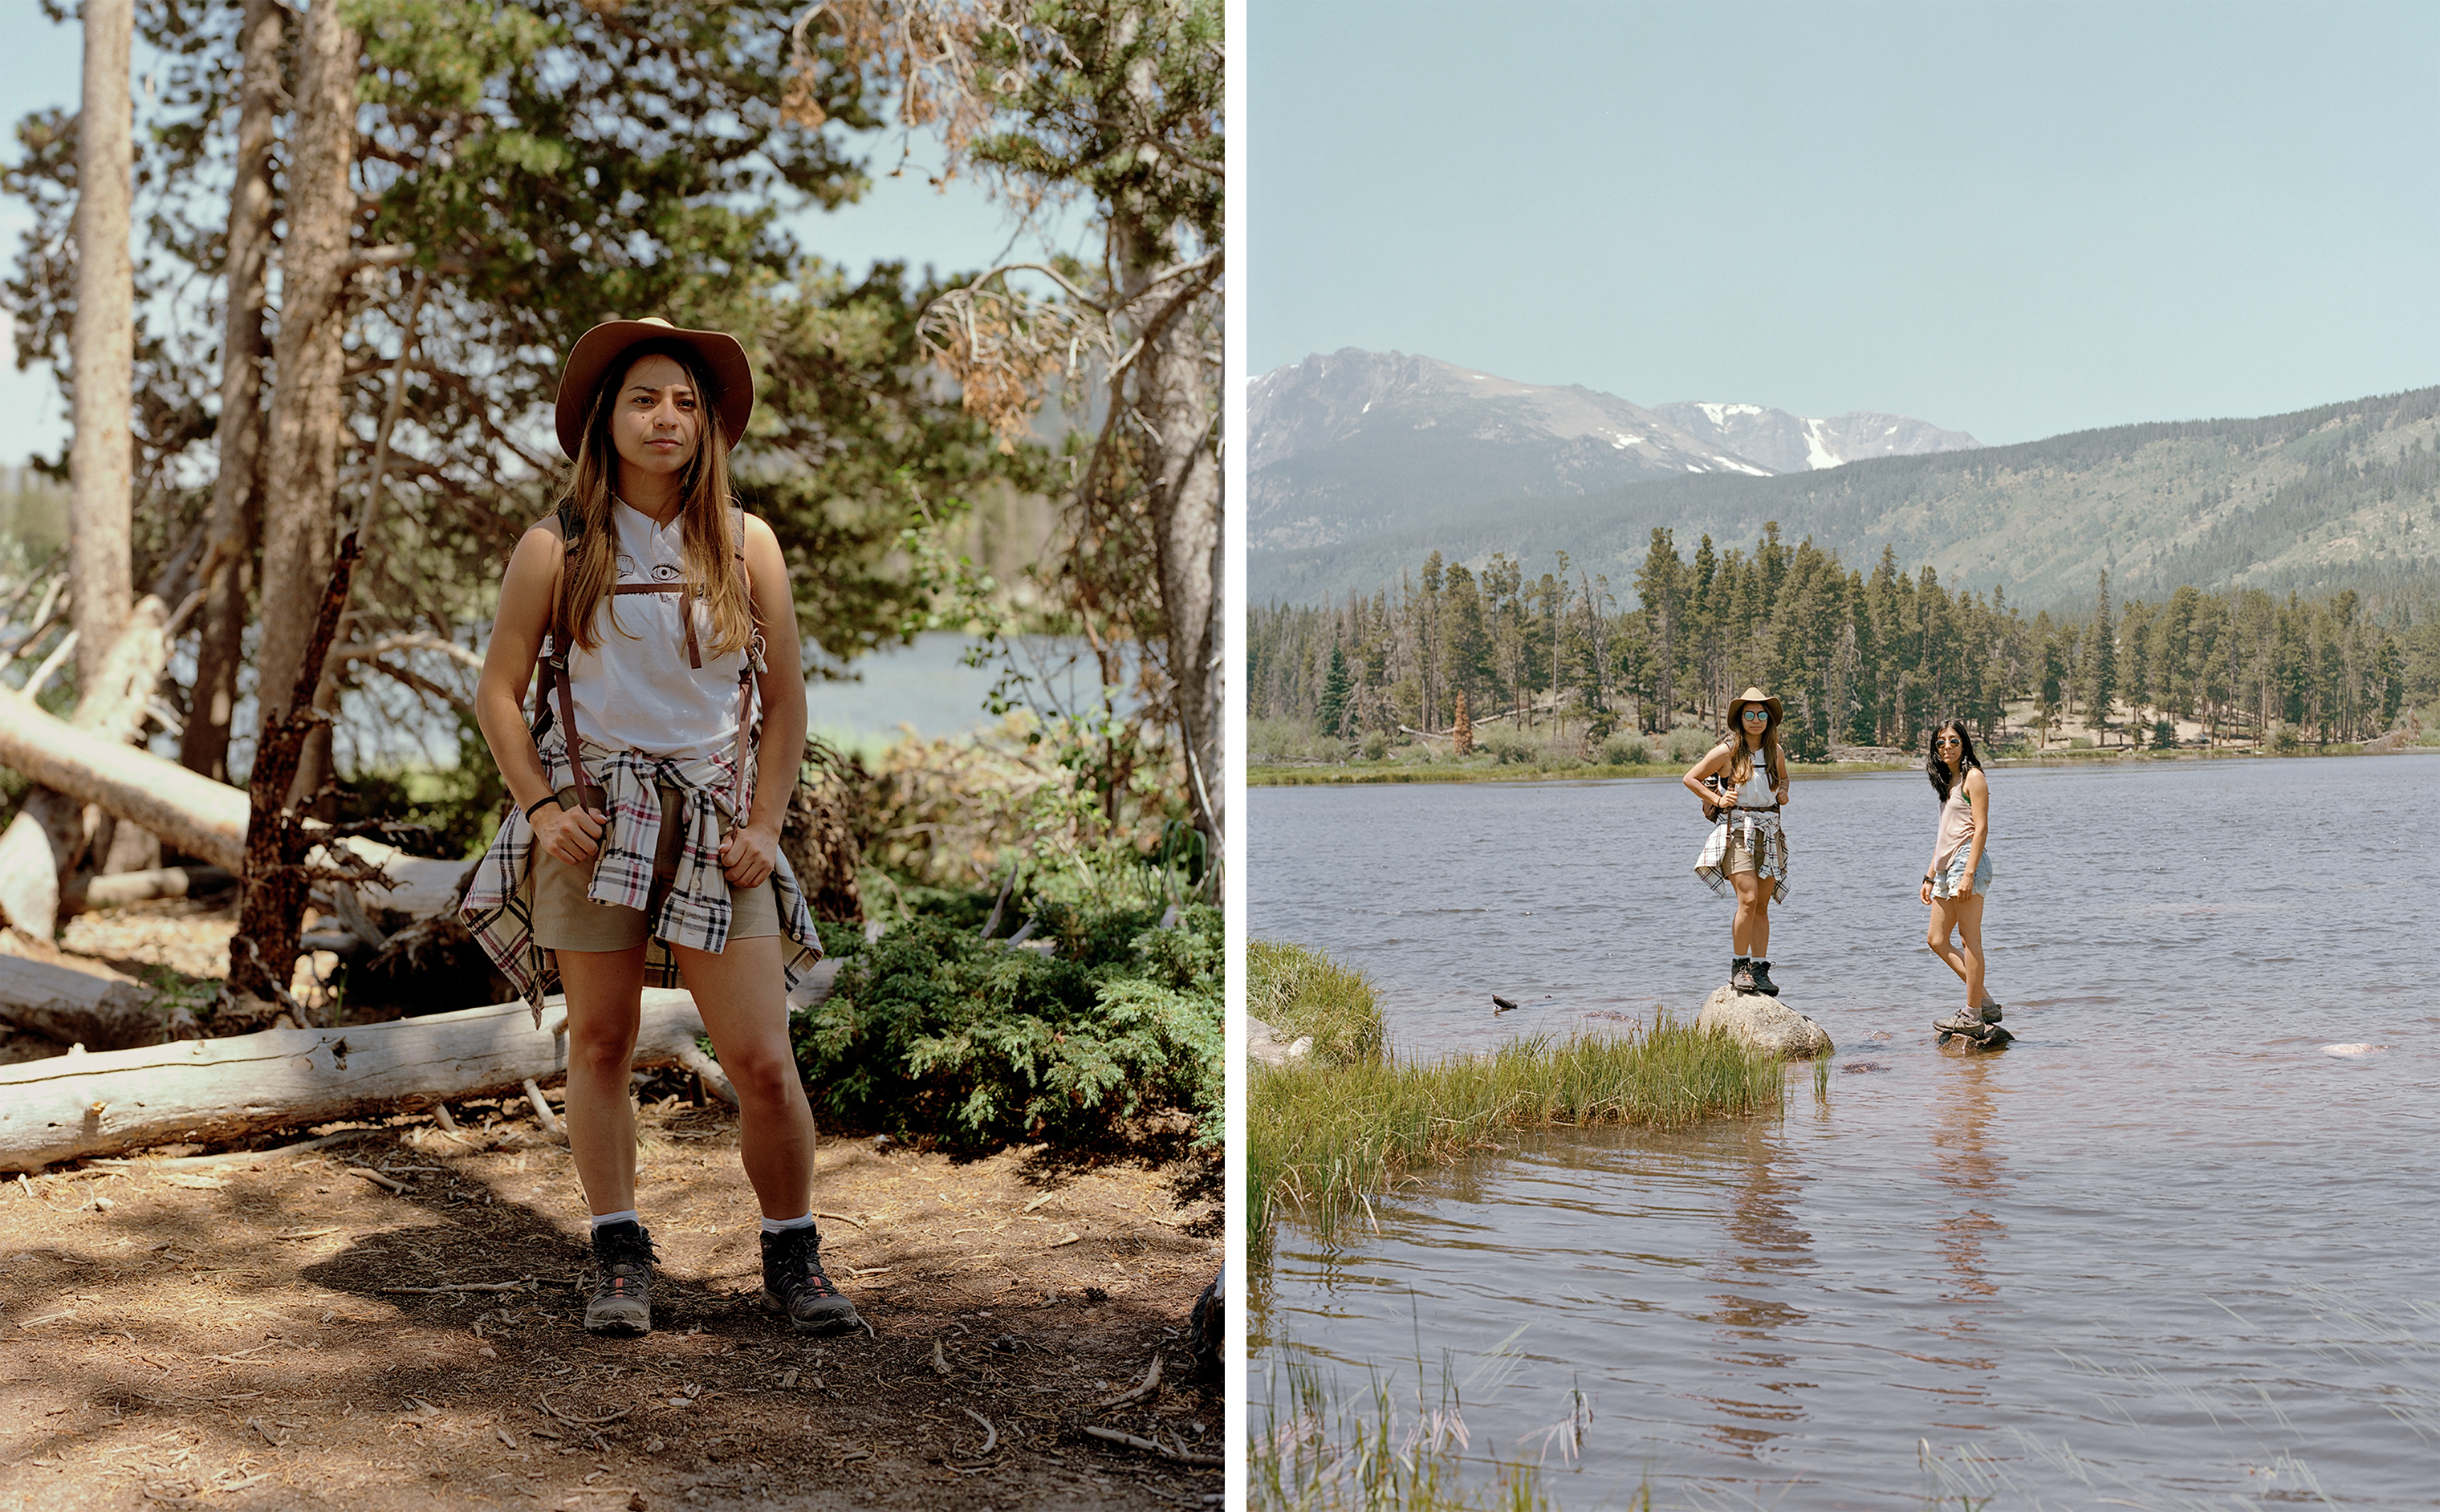 Cristal Cisneros, left, and Natalia Ospina at Sprague Lake in Rocky Mountain National Park, June 29, 2018. (Catherine Hyland for TIME)